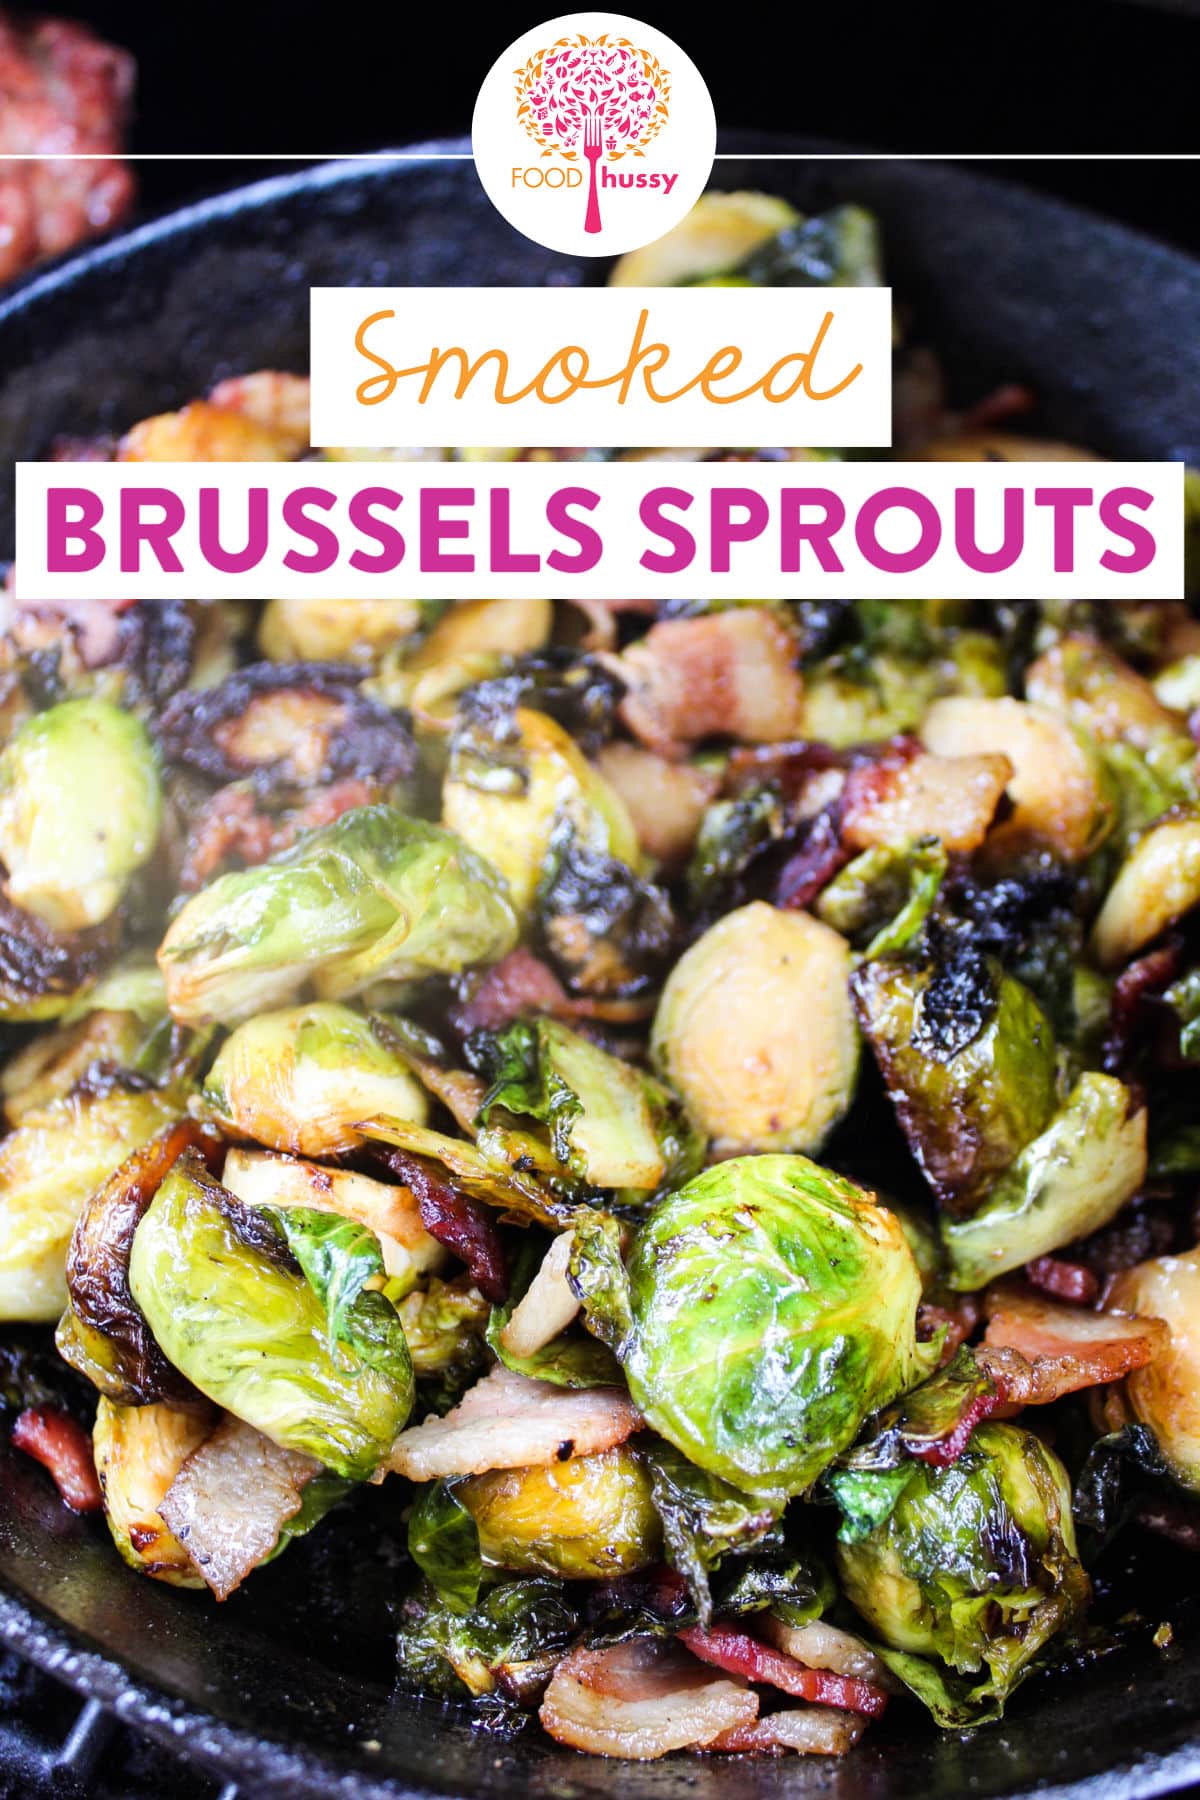 These Traeger Smoked Brussels Sprouts will be your new favorite vegetable side dish. Sauteed with diced bacon and tossed in a maple syrup sauce - nobody will be able to resist these caramelized bites of deliciousness! via @foodhussy